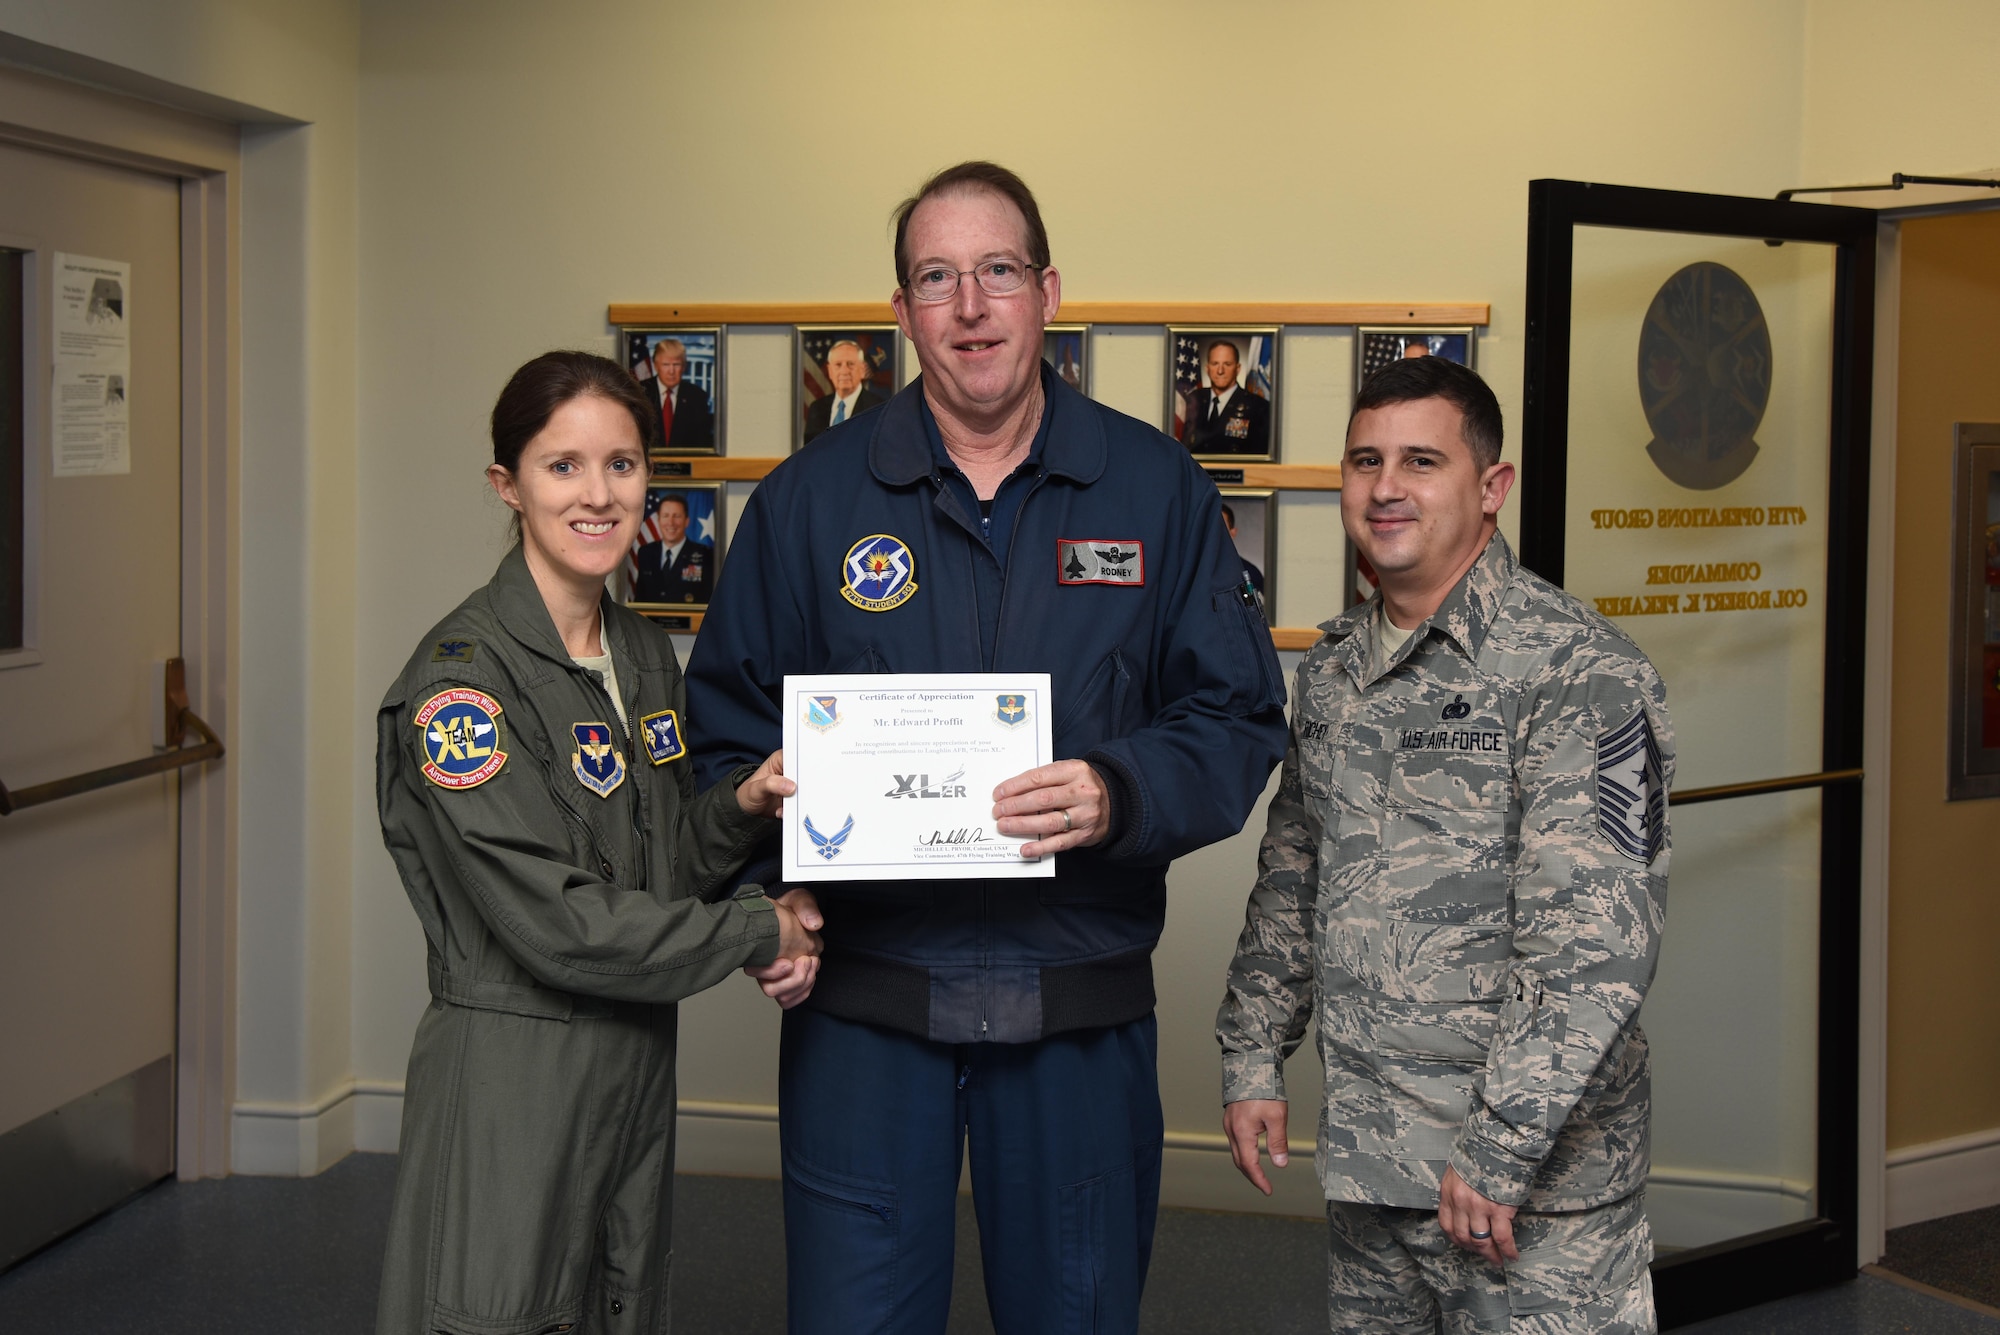 Edward Proffit, 47th Student Squadron T-6 Texan II civilian simulator instructor and phase one handler, was chosen by wing leadership to be the “XLer” for the week of Oct. 18, 2017. The “XLer,” a wing-level program, is awarded to those who consistently make outstanding contributions to their unit and Laughlin’s mission. (U.S. Air Force photo/Airman 1st Class Anne McCready)